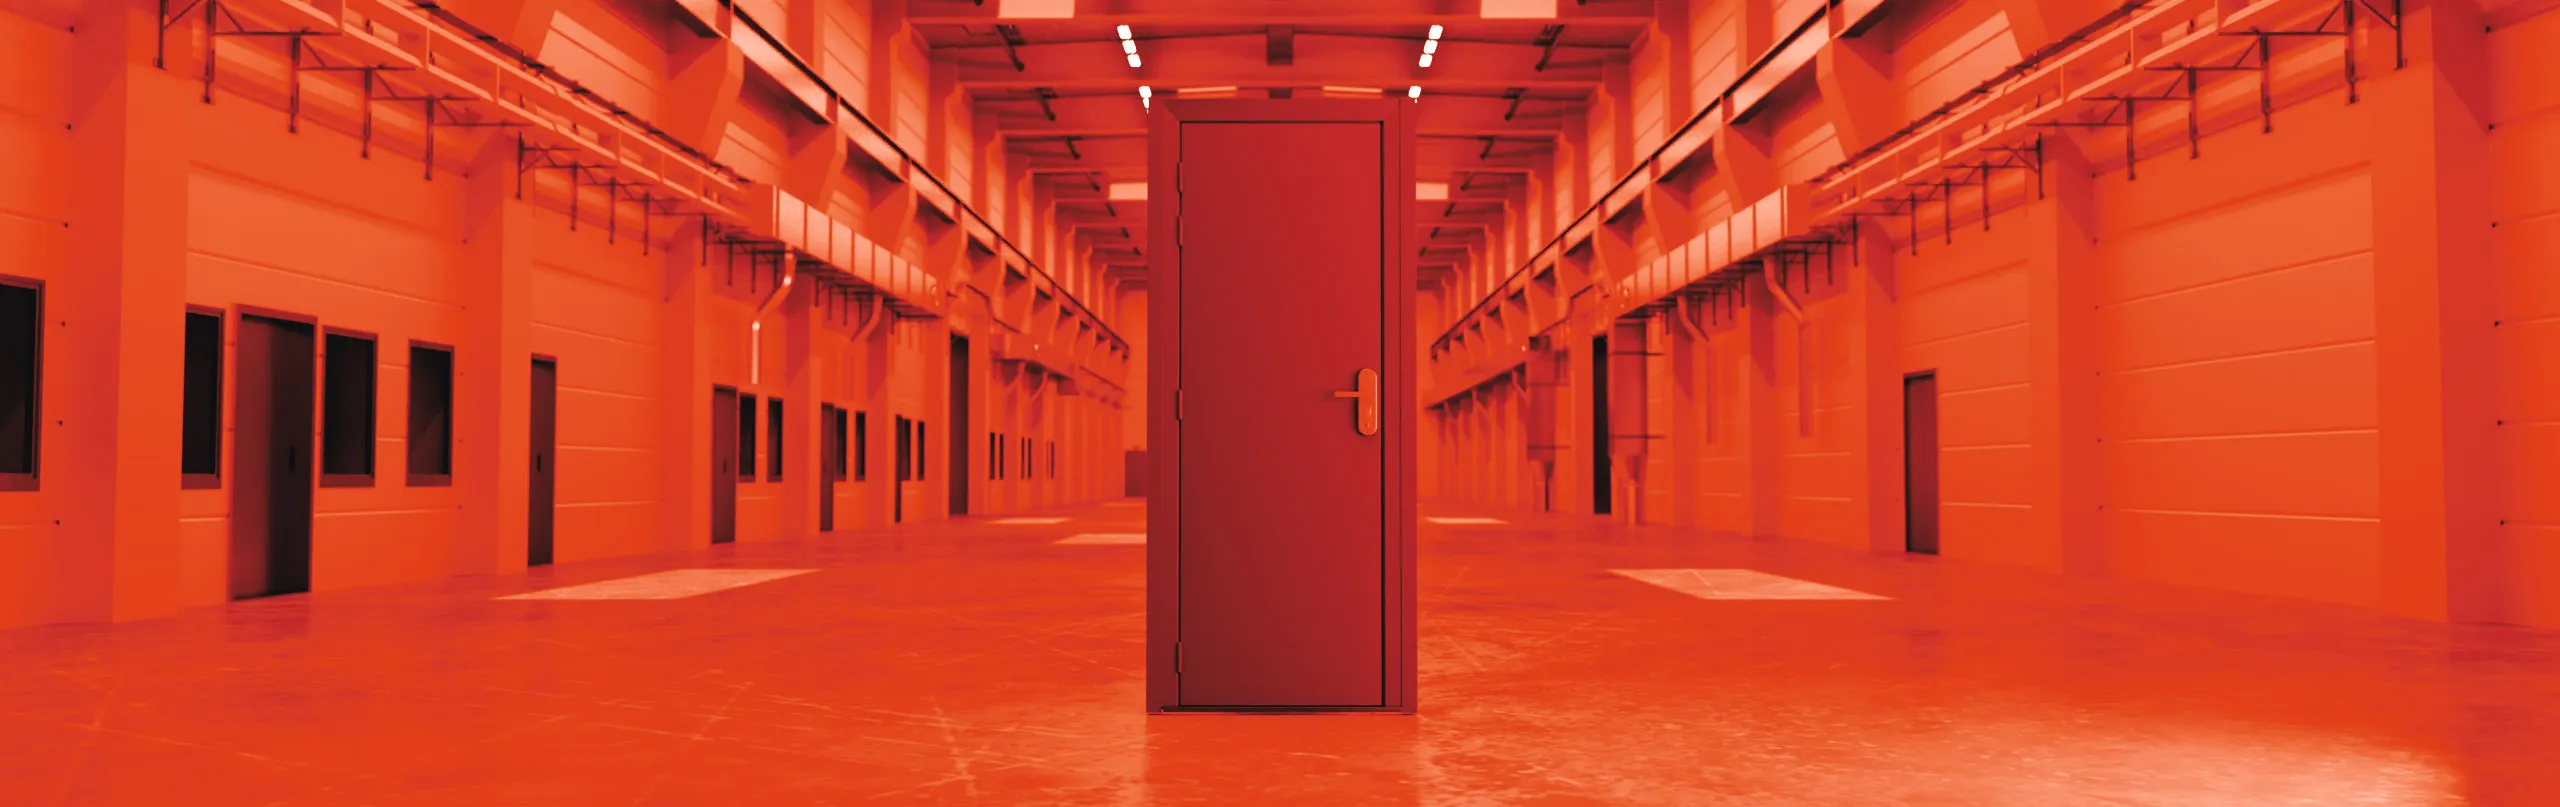 A single red door without any walls is standing in the centre of a long red corridor that has windows and doors lining both walls.